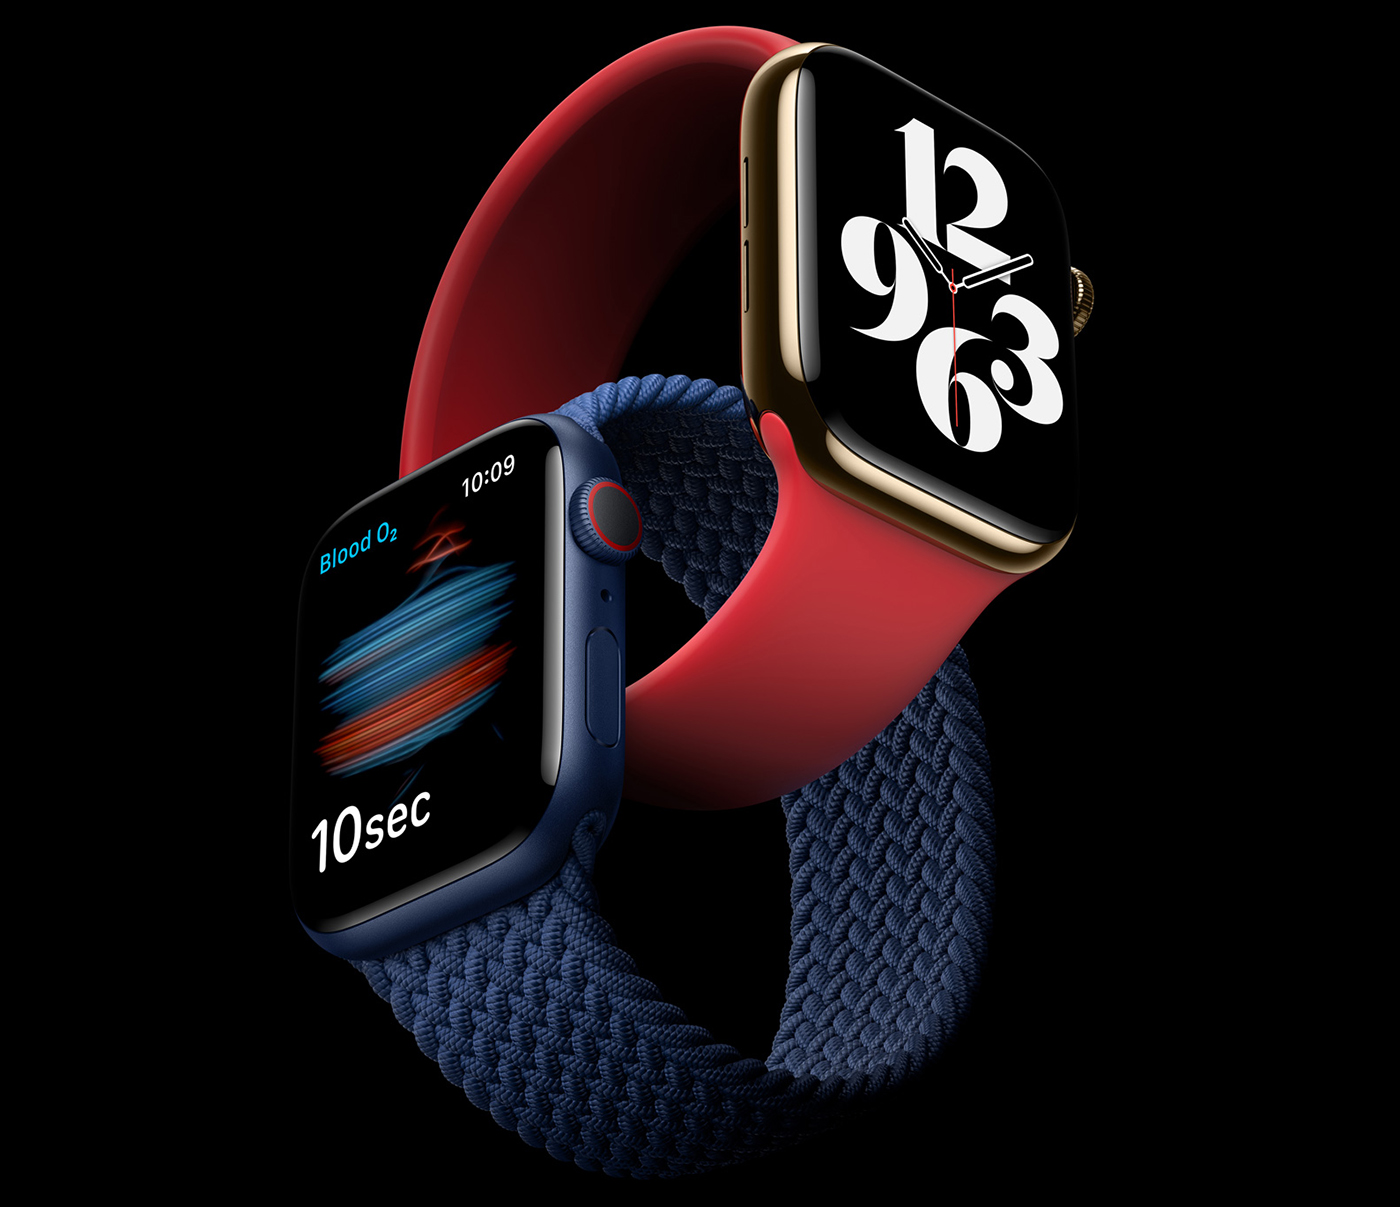 The New Apple Watch Series 6 Gets Colorful Updates, Now Measures Blood Oxygen Levels Watch Releases 